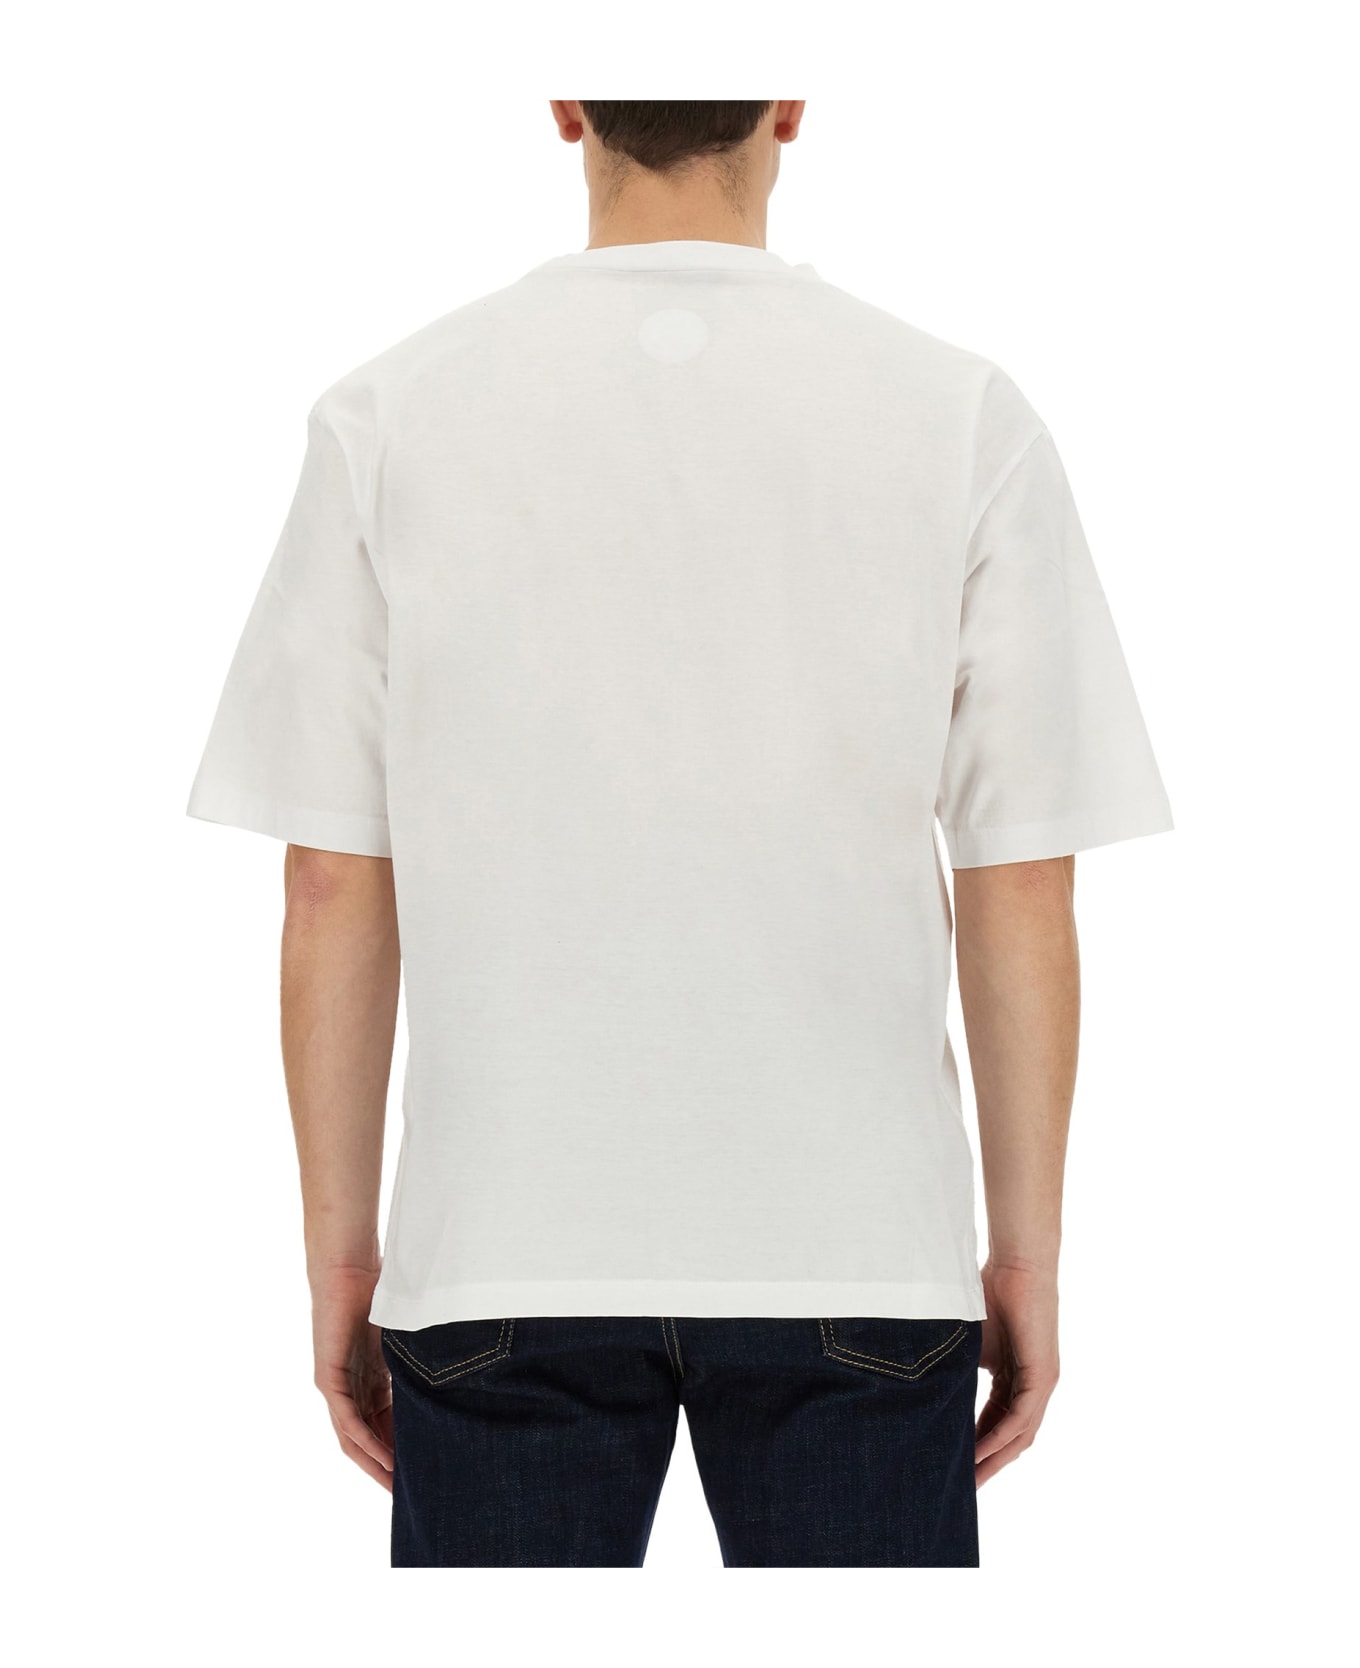 Dsquared2 T-shirt With Print - BIANCO シャツ